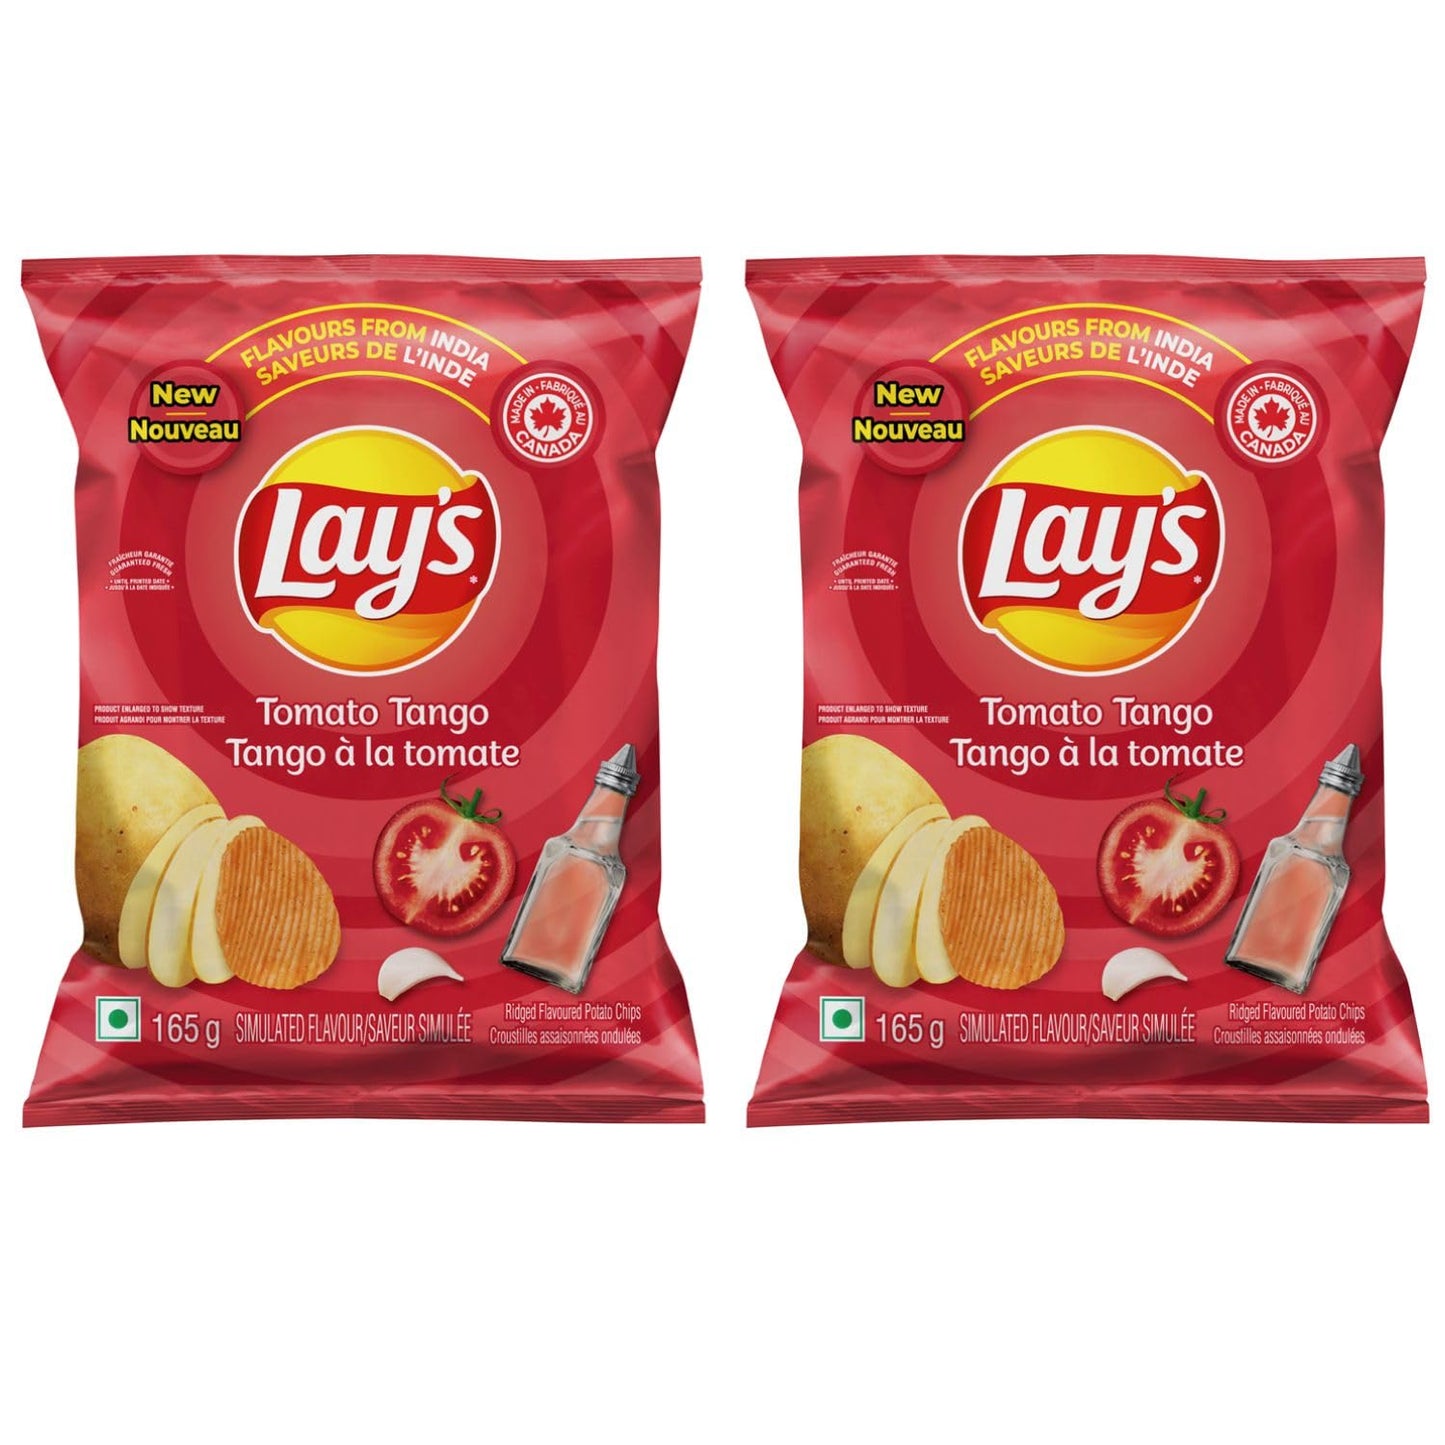 Lays Flavours from India Tomato Tango Ridged Potato Chips pack of 2